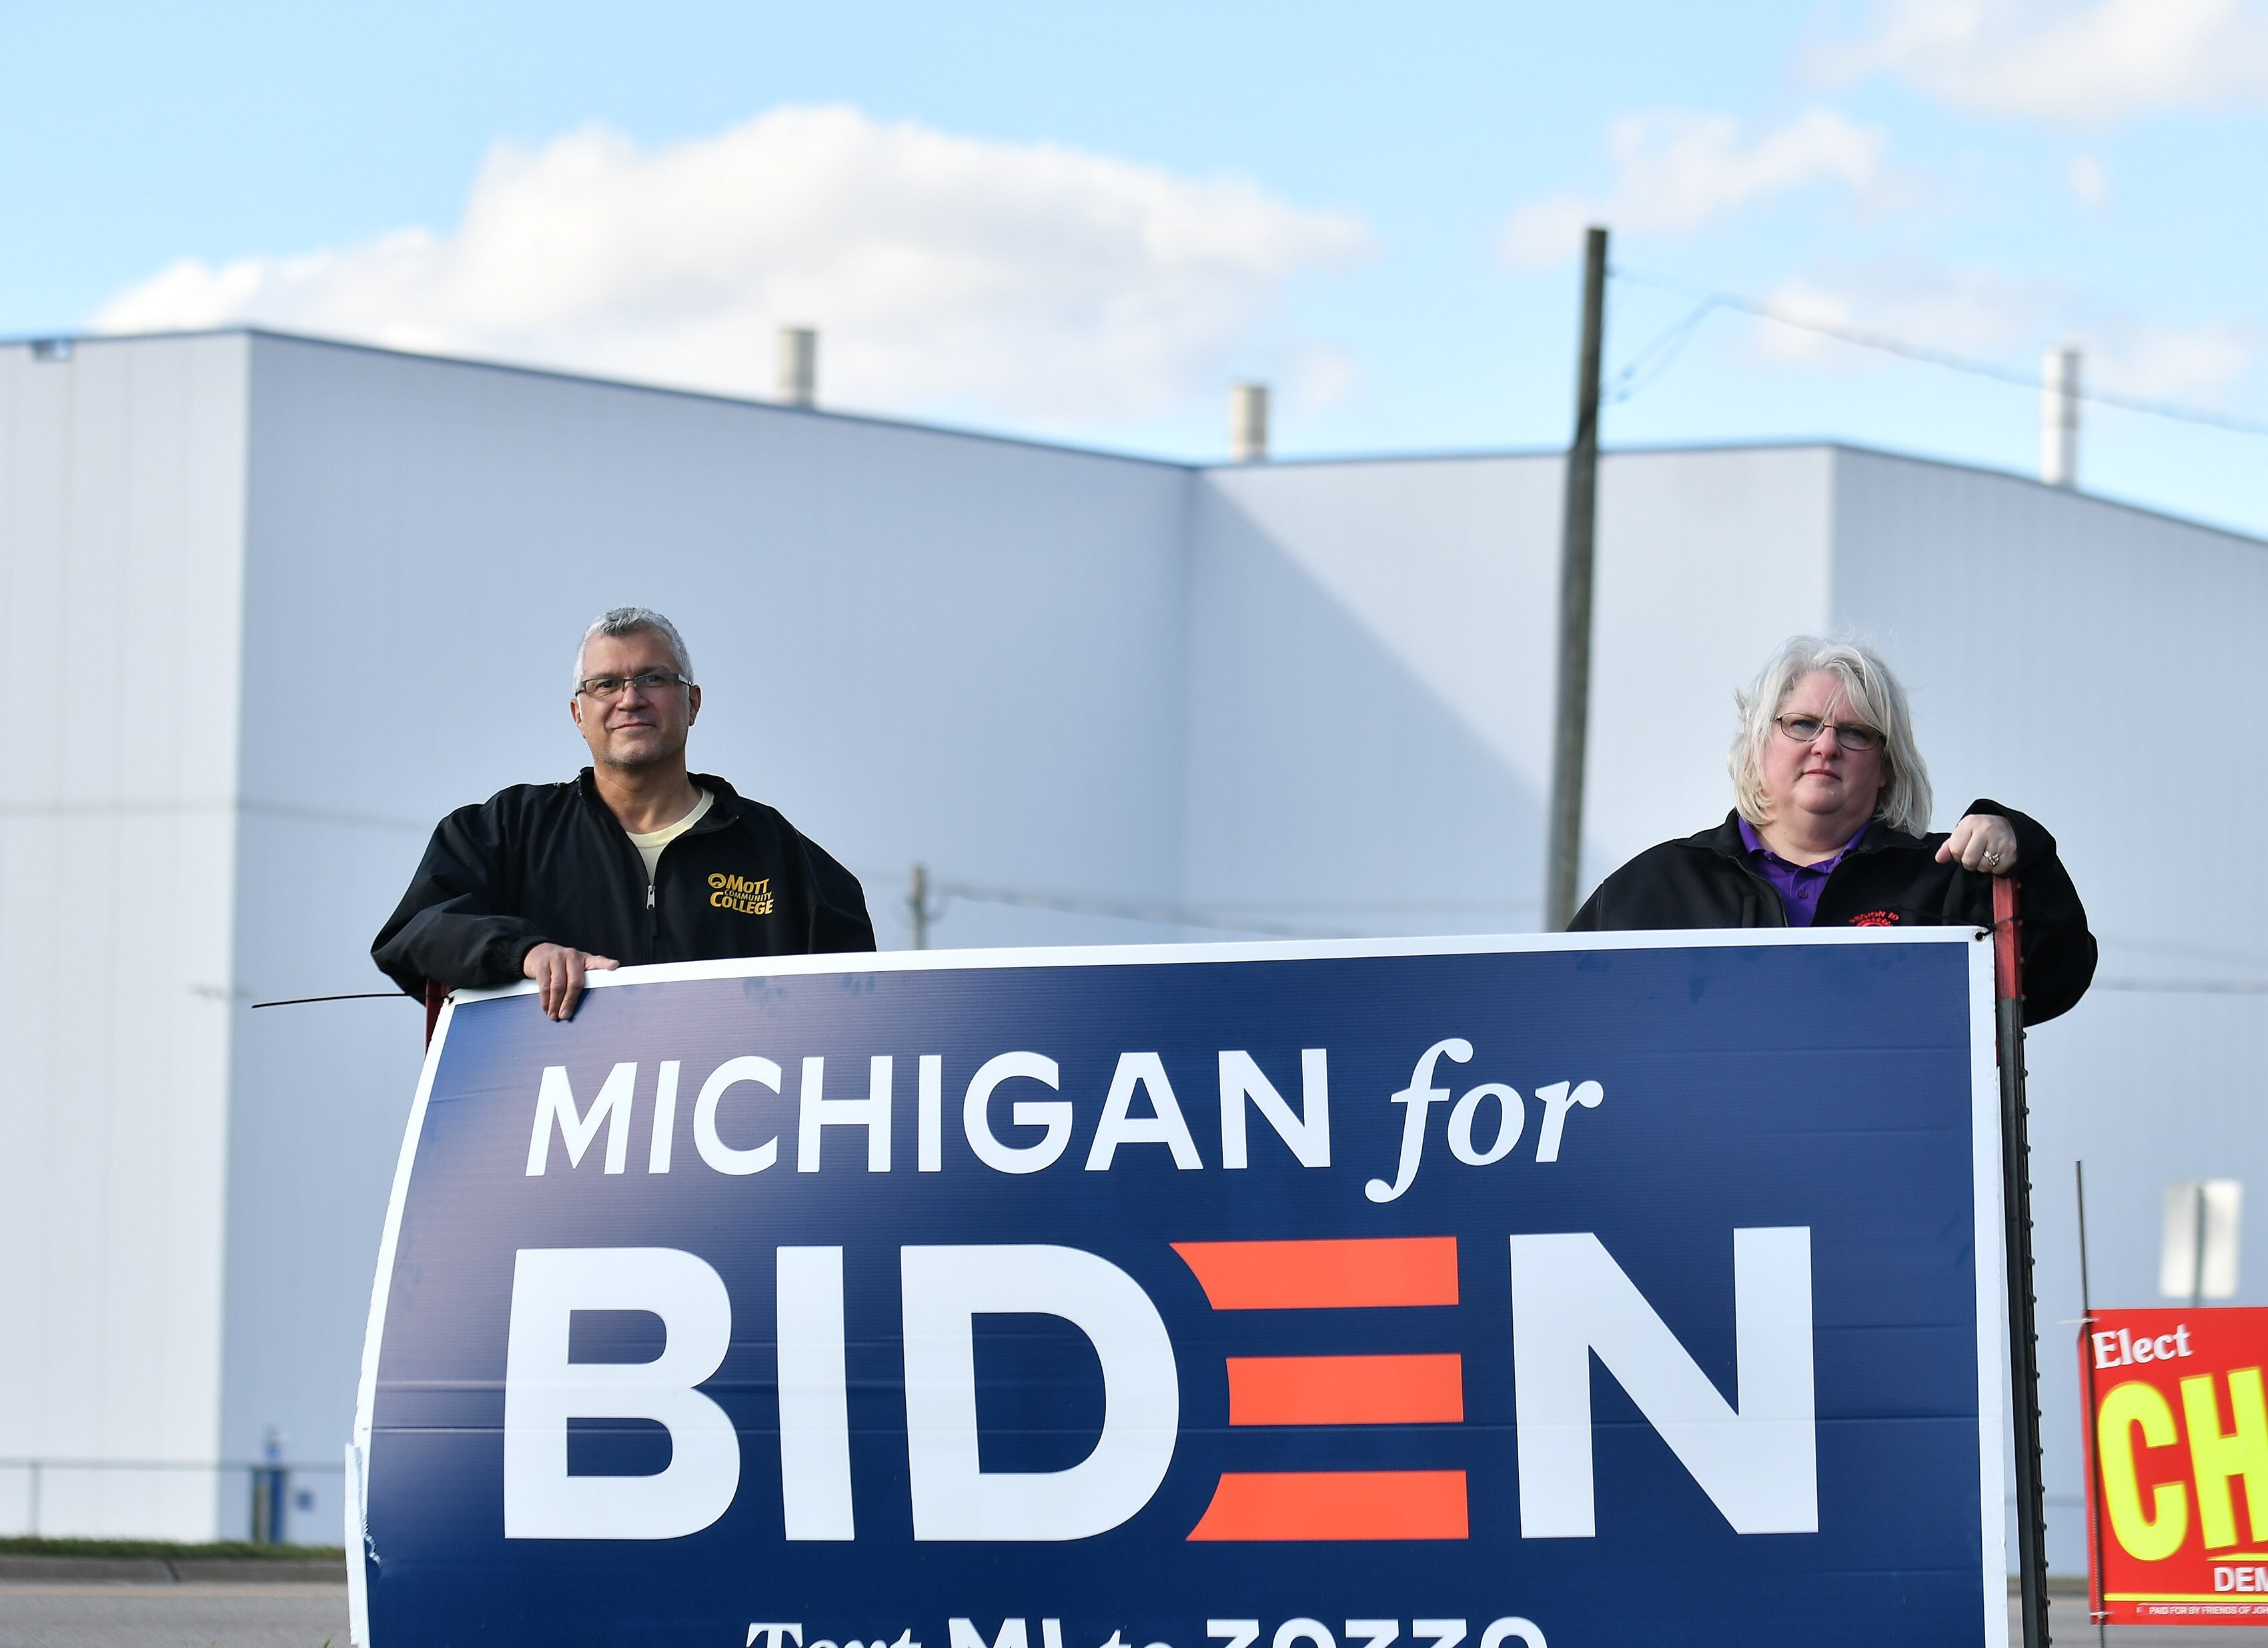 Auto workers at a General Motors plant in Flint, Michigan, show their support for Democratic candidate Joe Biden. Photo: TNS